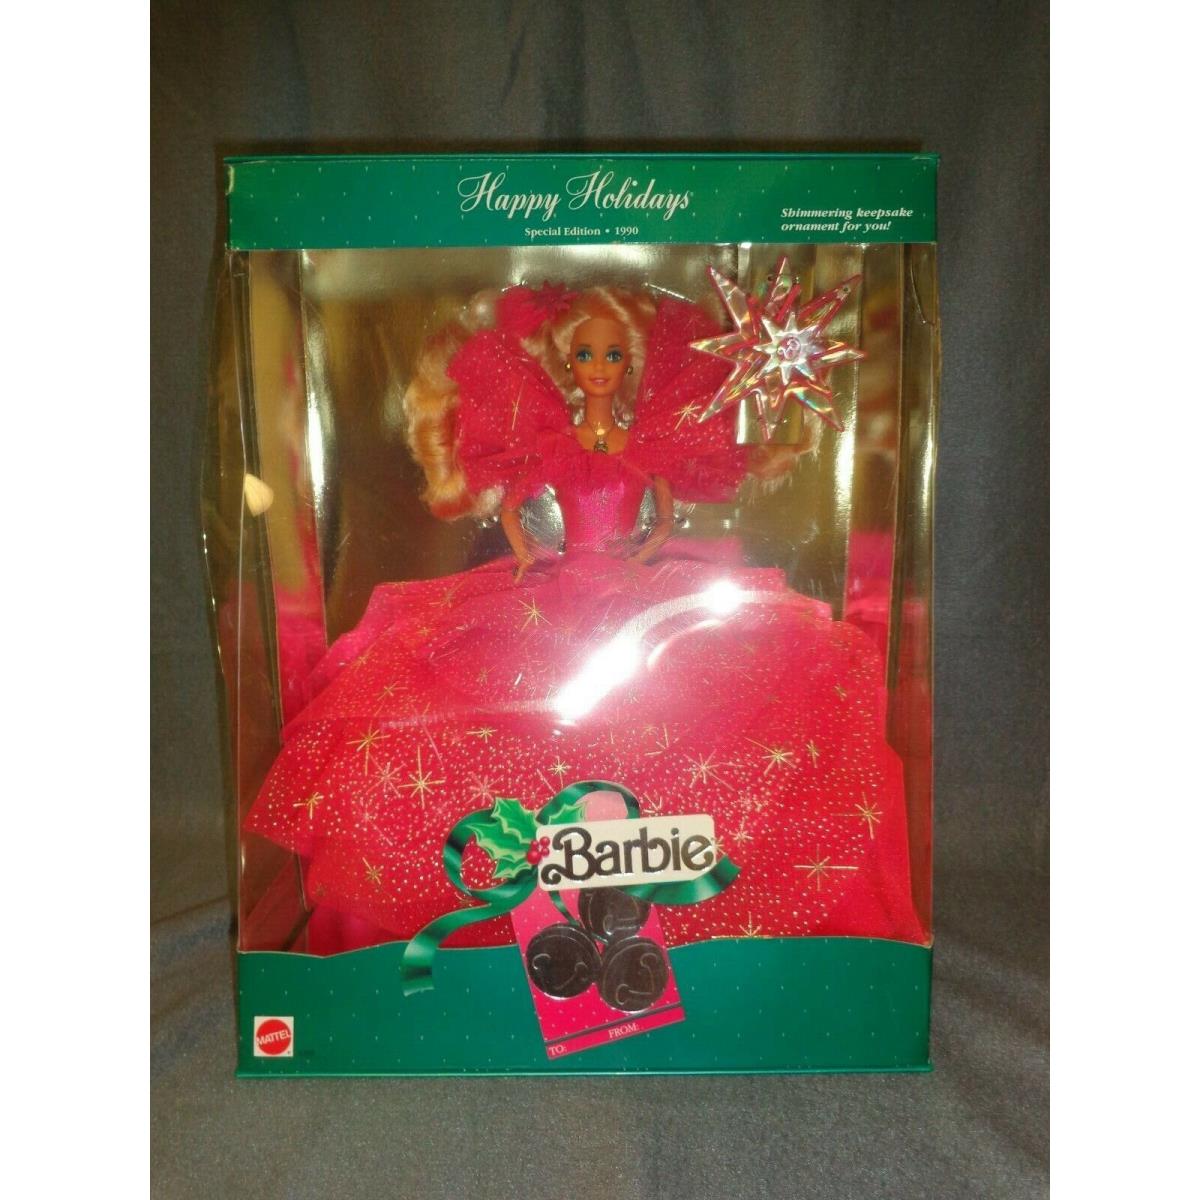 Mint Never Opened or Displayed Happy Holidays 1990 Barbie Rare Sparkle